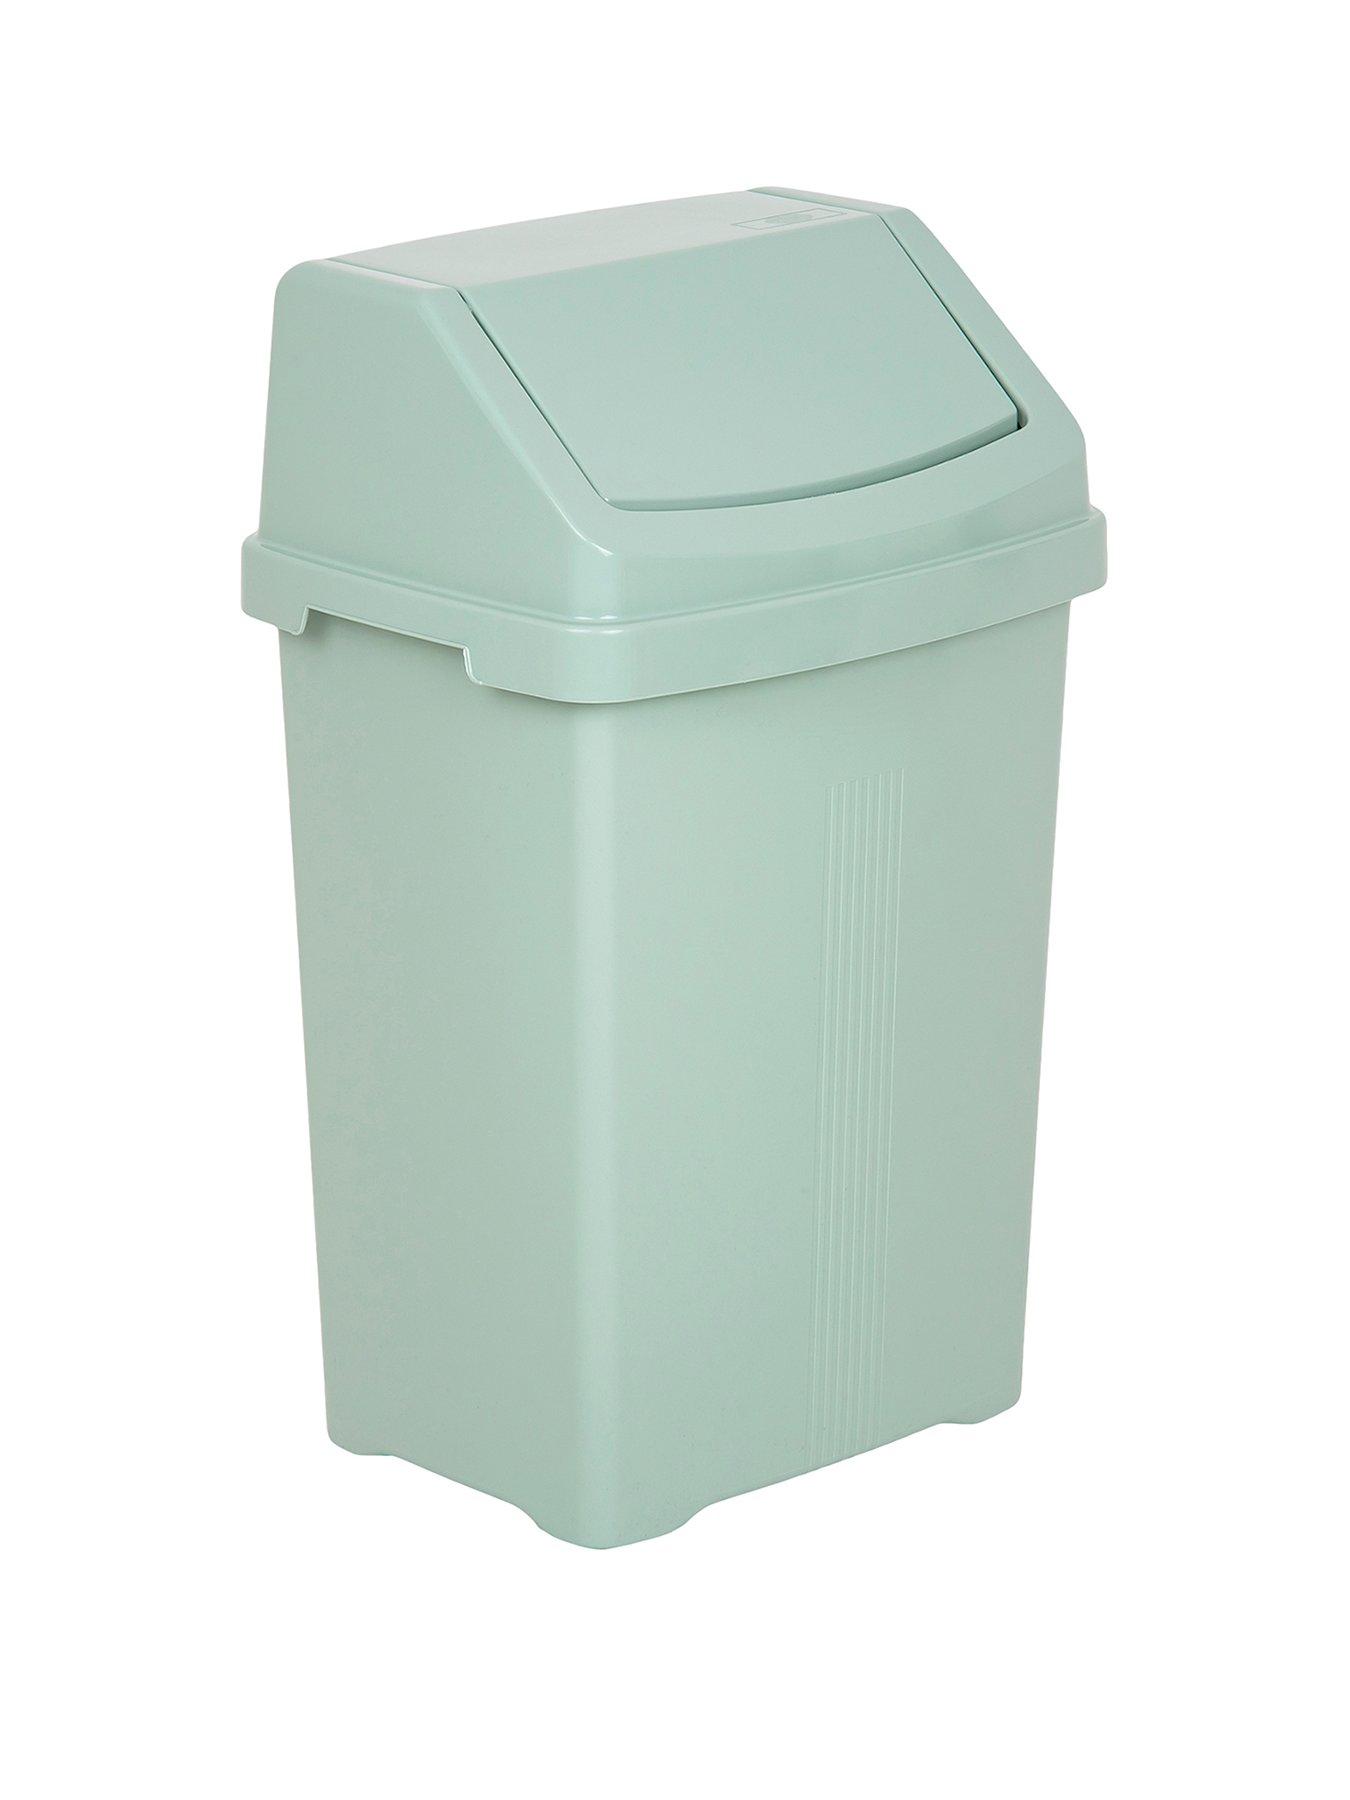 Extra Large and Small Rounded Funky Swing Bins for kitchen 25L, Green Recycling Bin Dustbin with Lids 